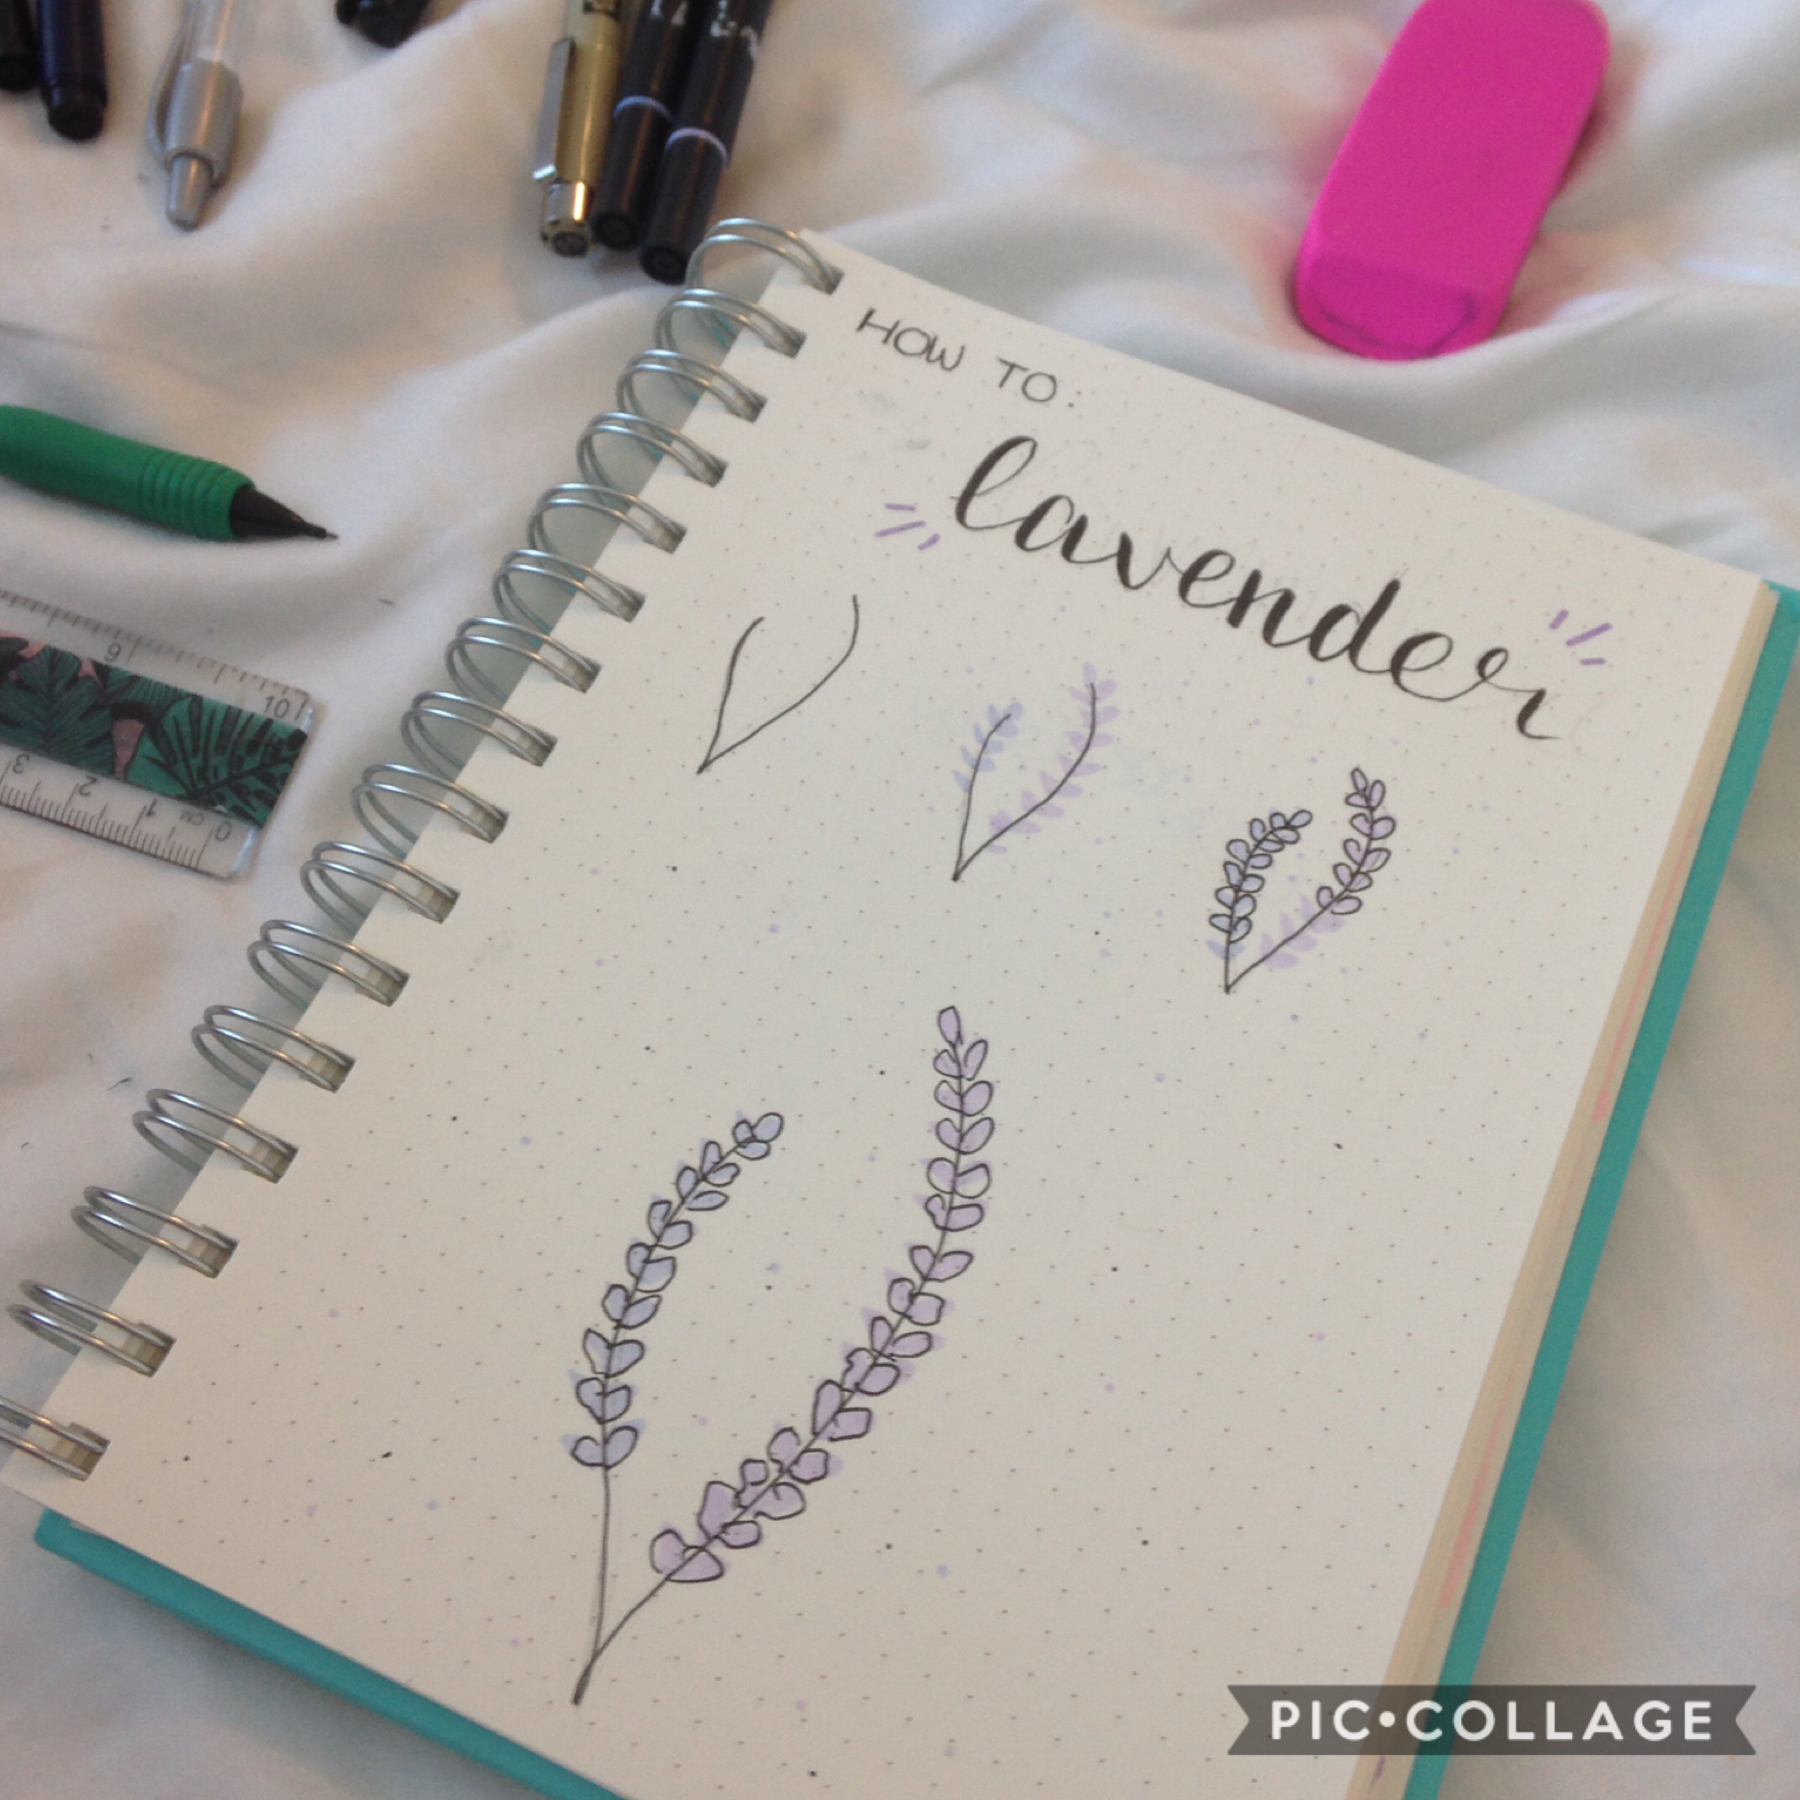 I think bullet journaling has become my way of entertaining myself in these weird times. Hope all of y'all are healthy!